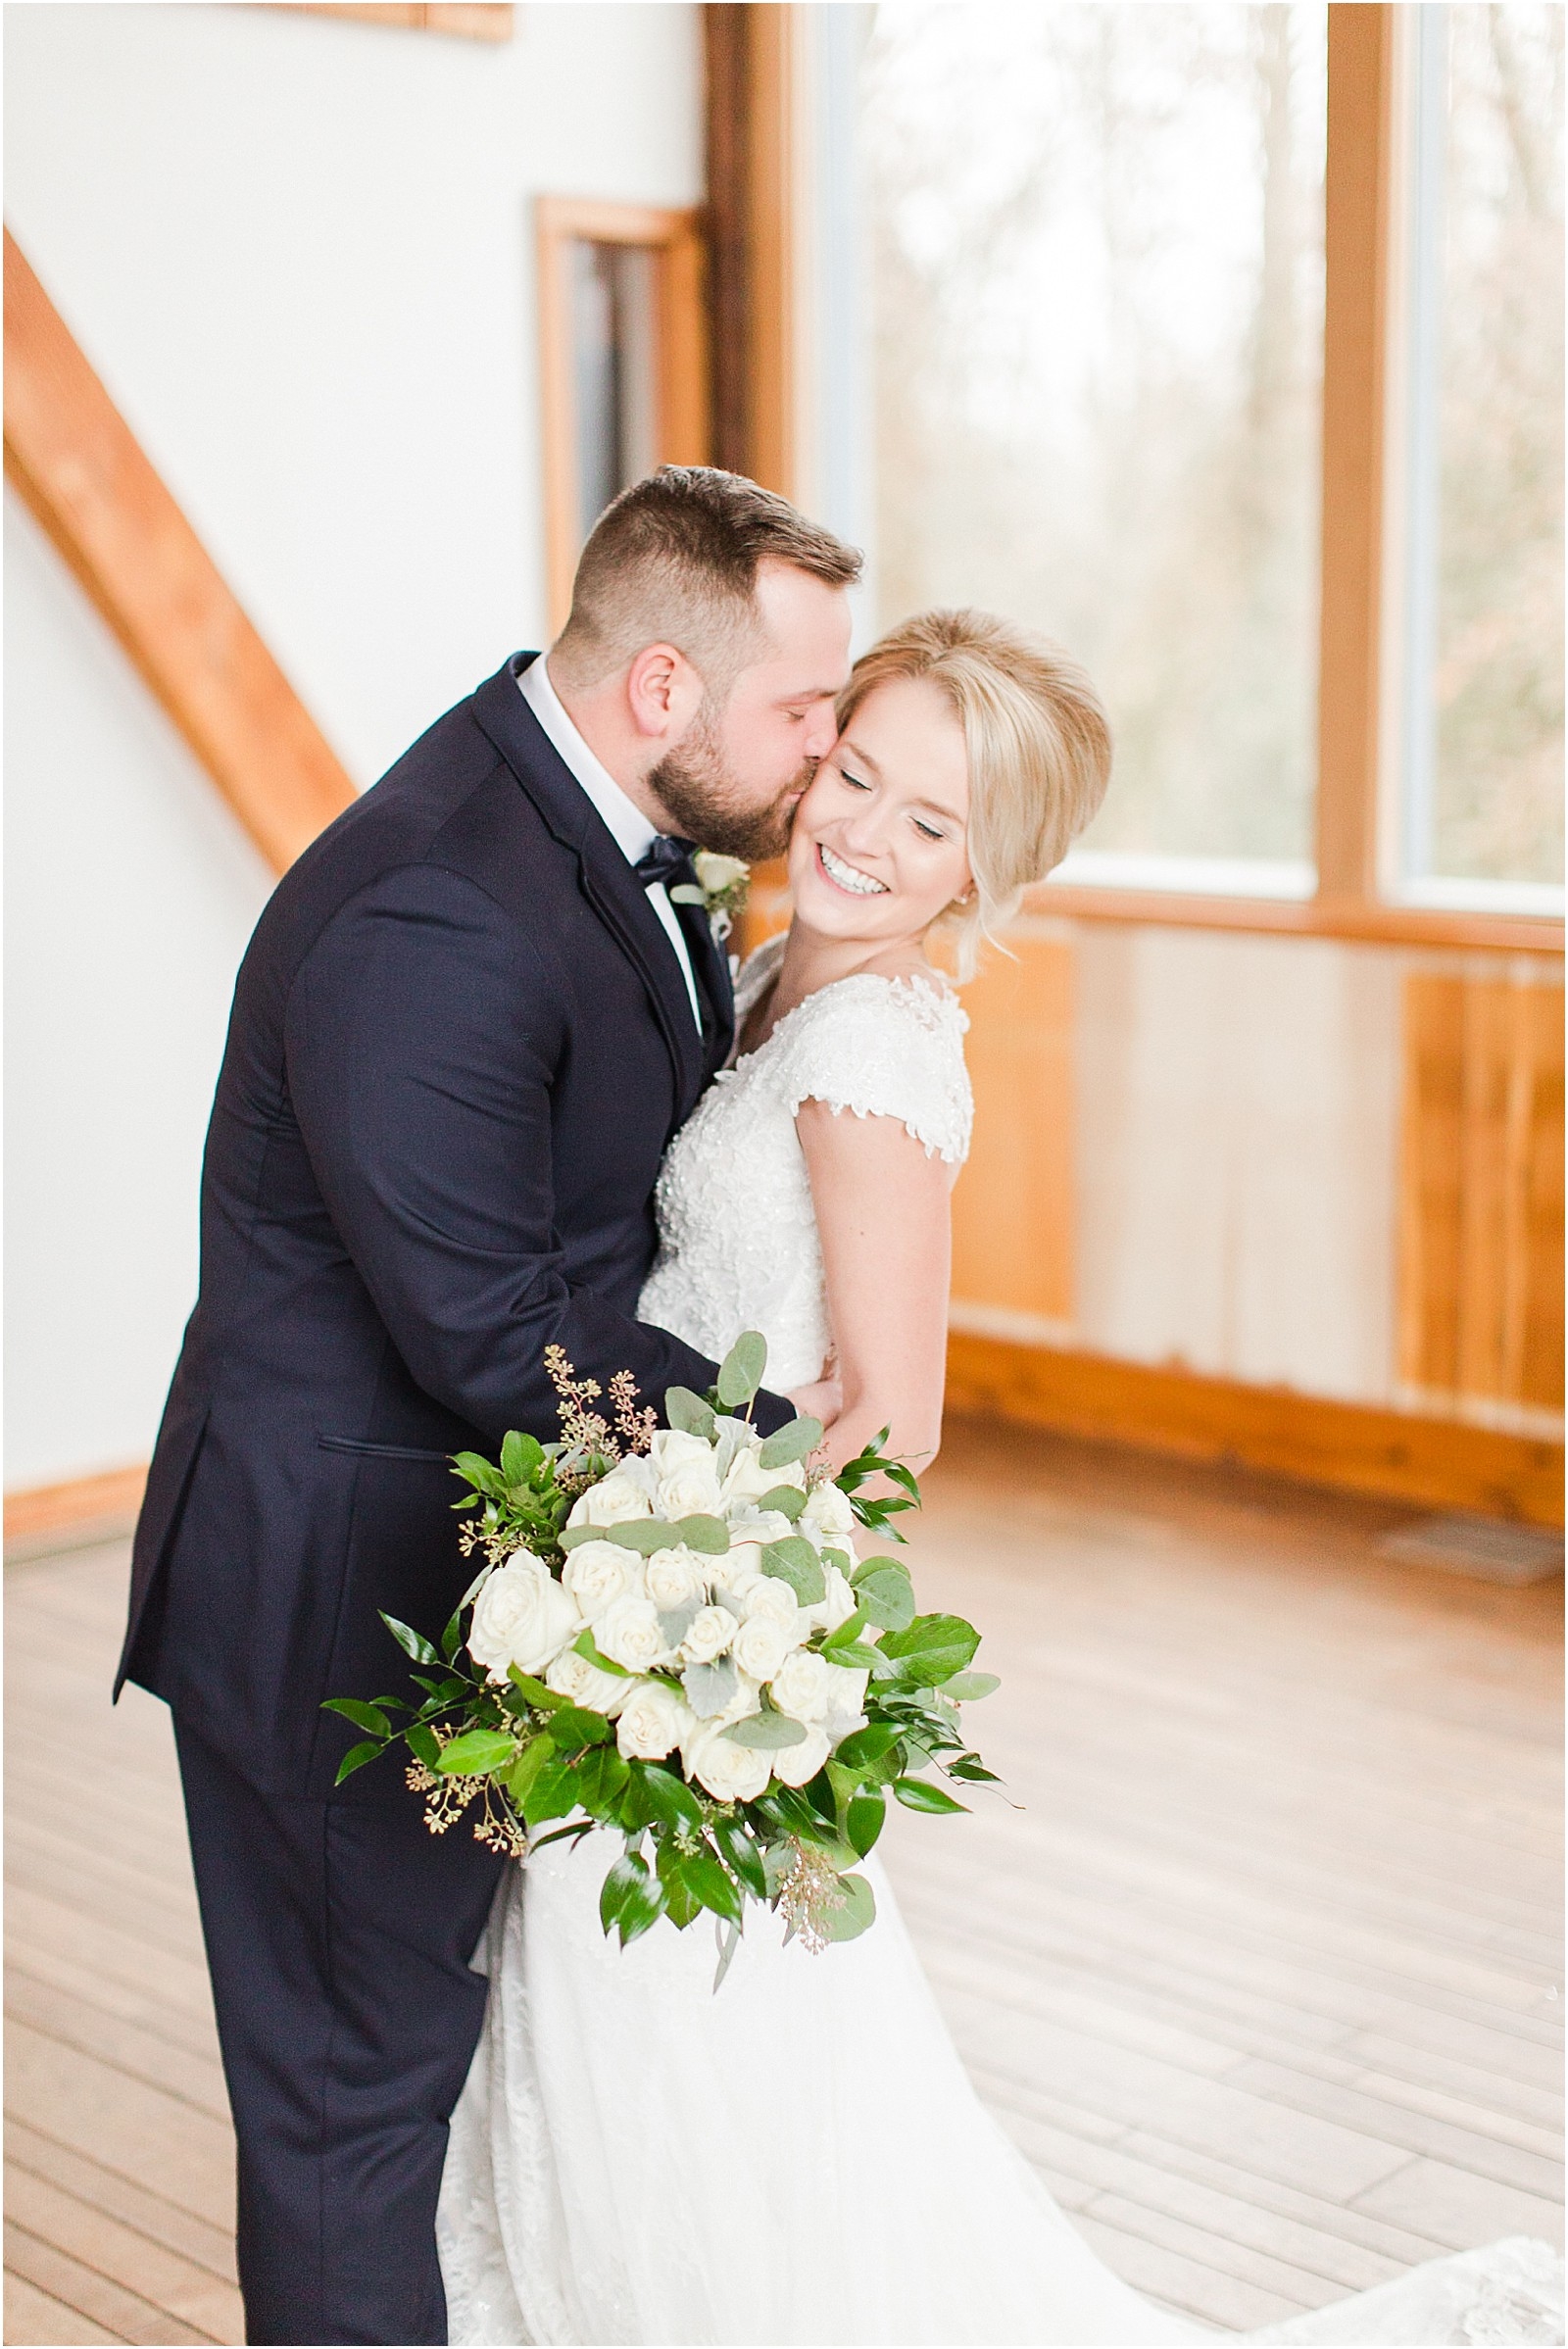 A Classic Winter Wedding in New Harmony | Rachel and Ryan | Bret and Brandie Photography 0095.jpg